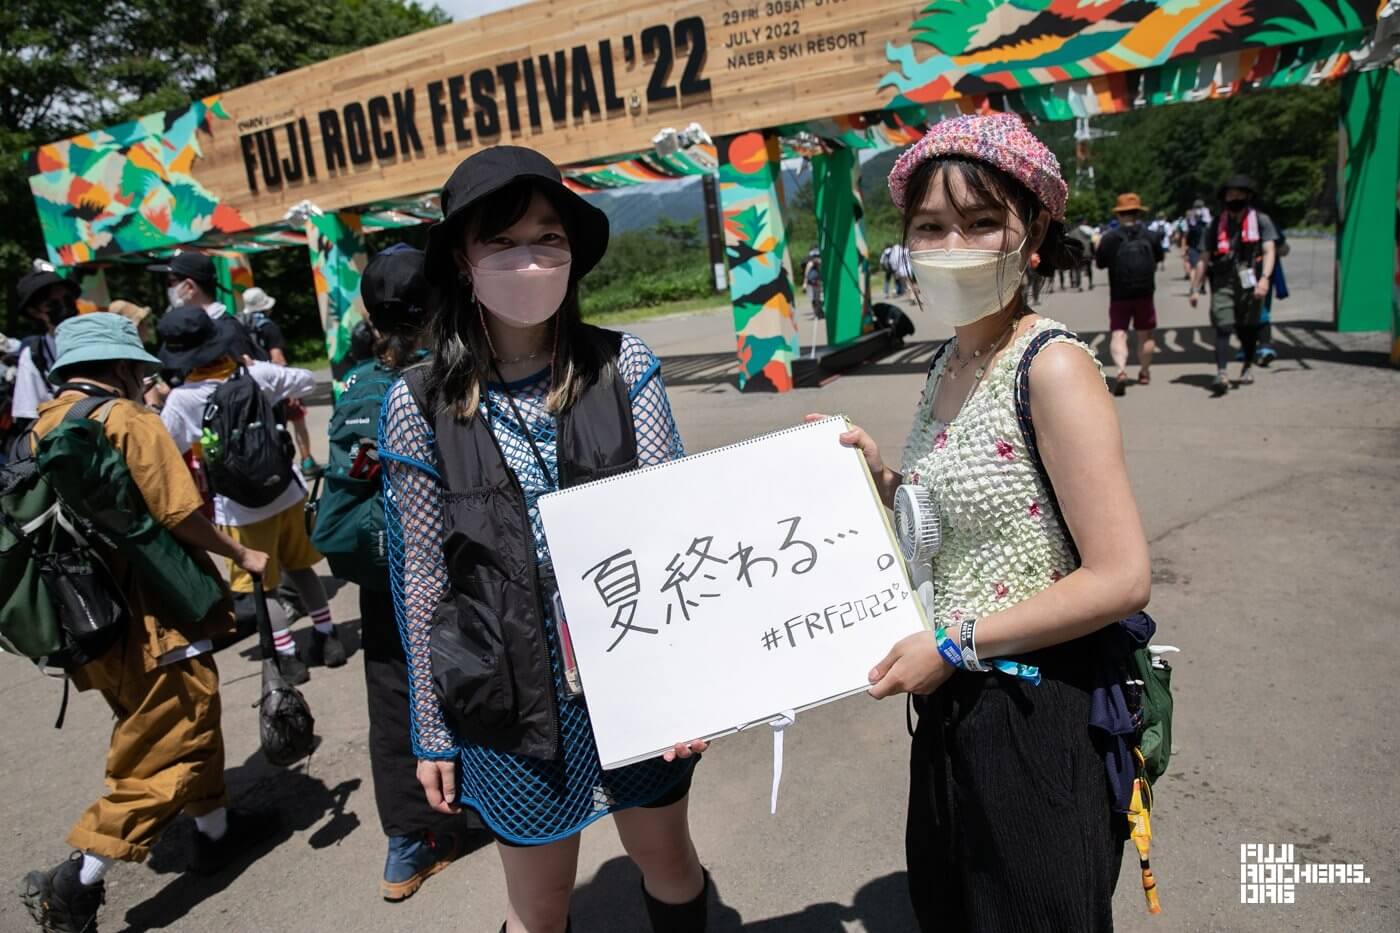 Message For FUJI ROCK12